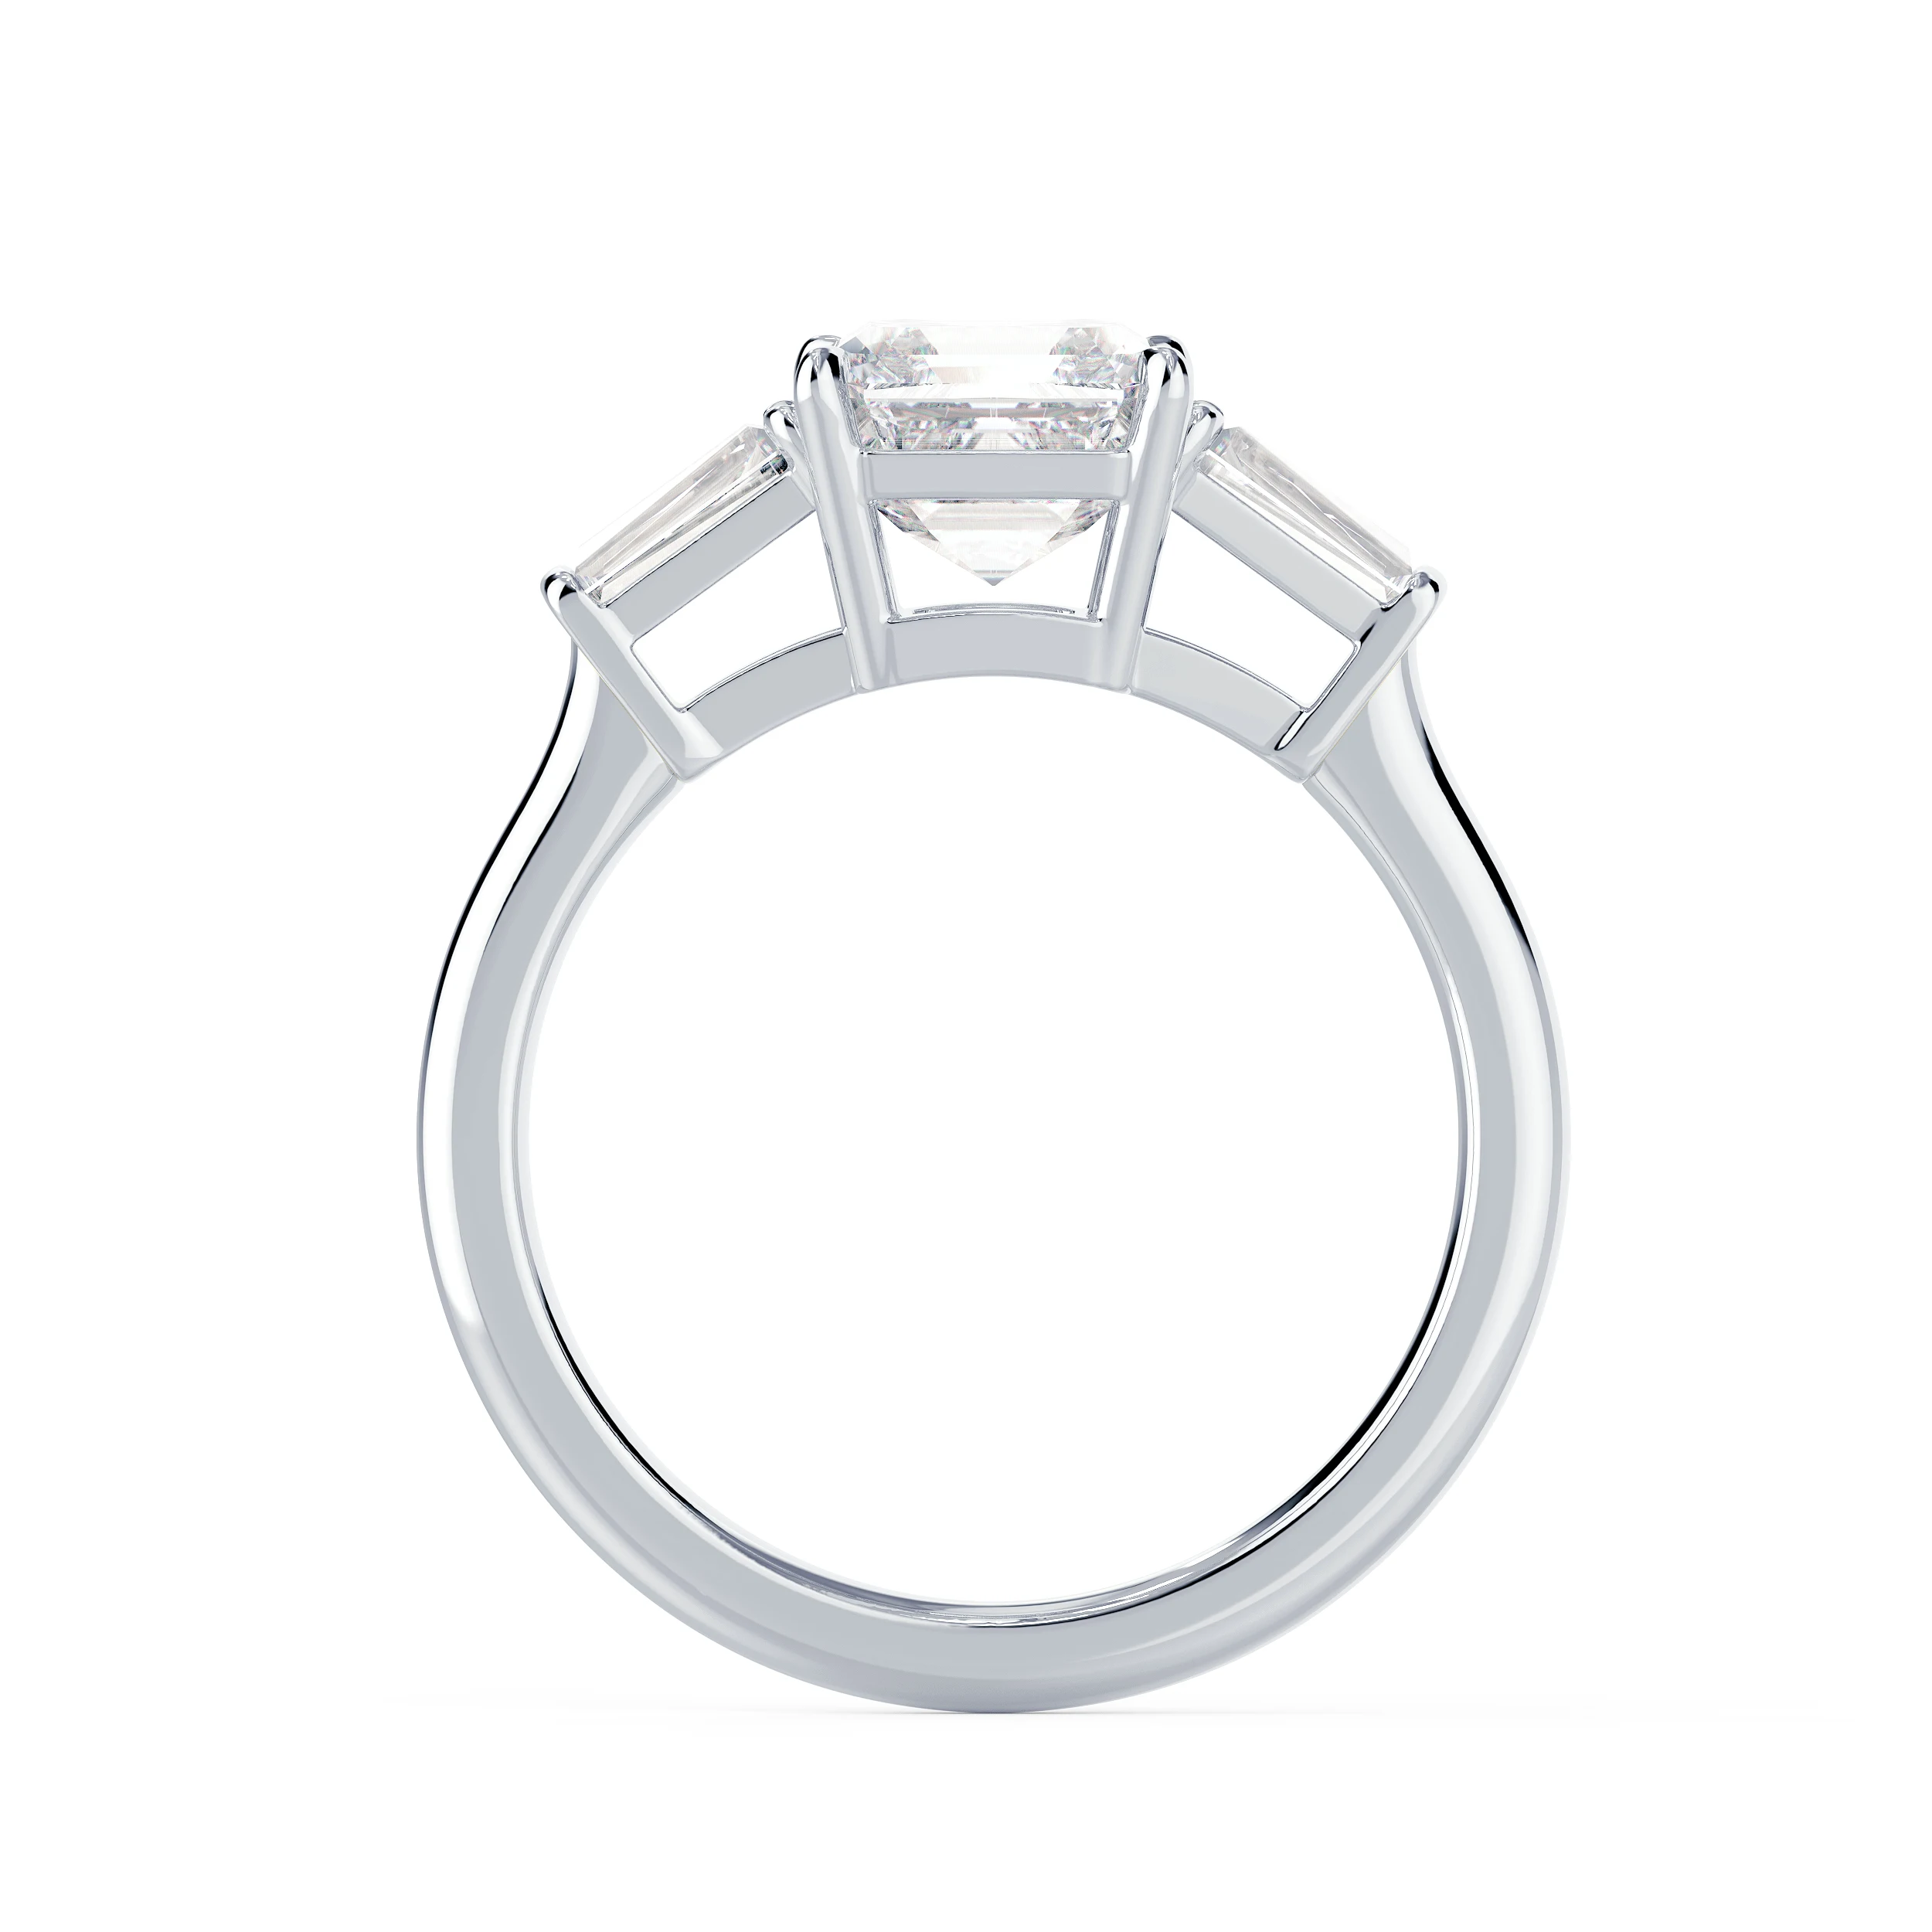 Lab Diamonds Asscher and Baguette Diamond Engagement Ring in White Gold (Profile View)